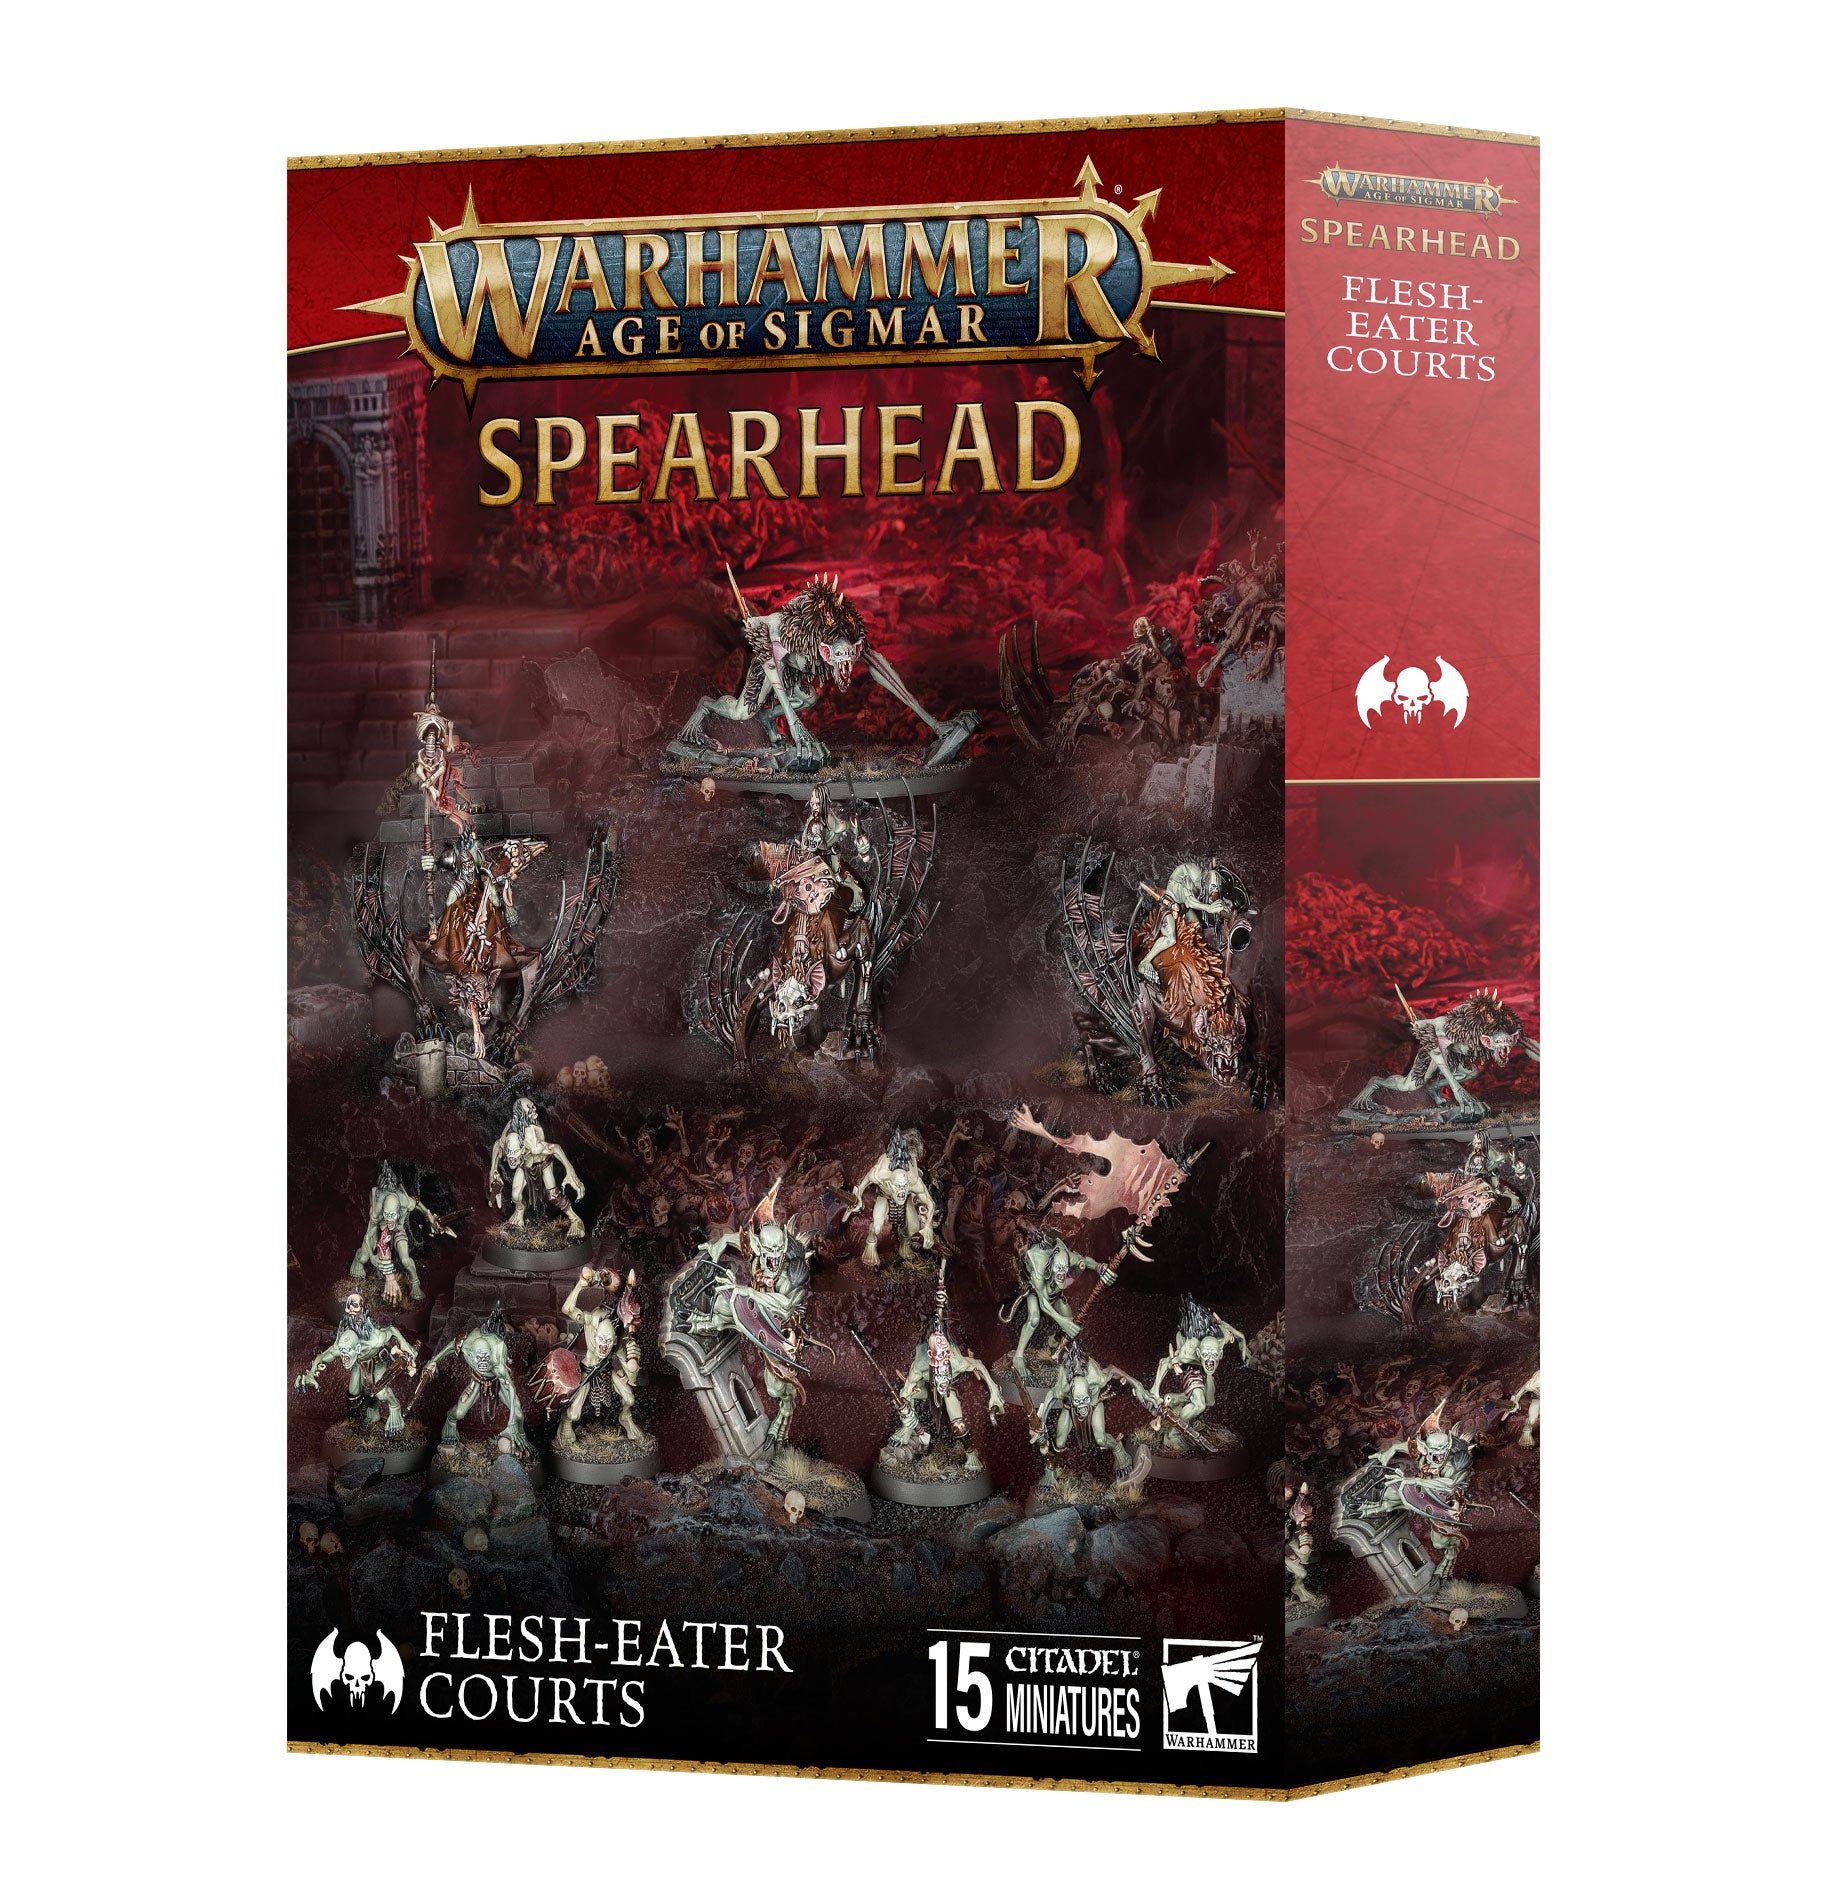 Age of Sigmar Spearhead Flesh-Eater Courts